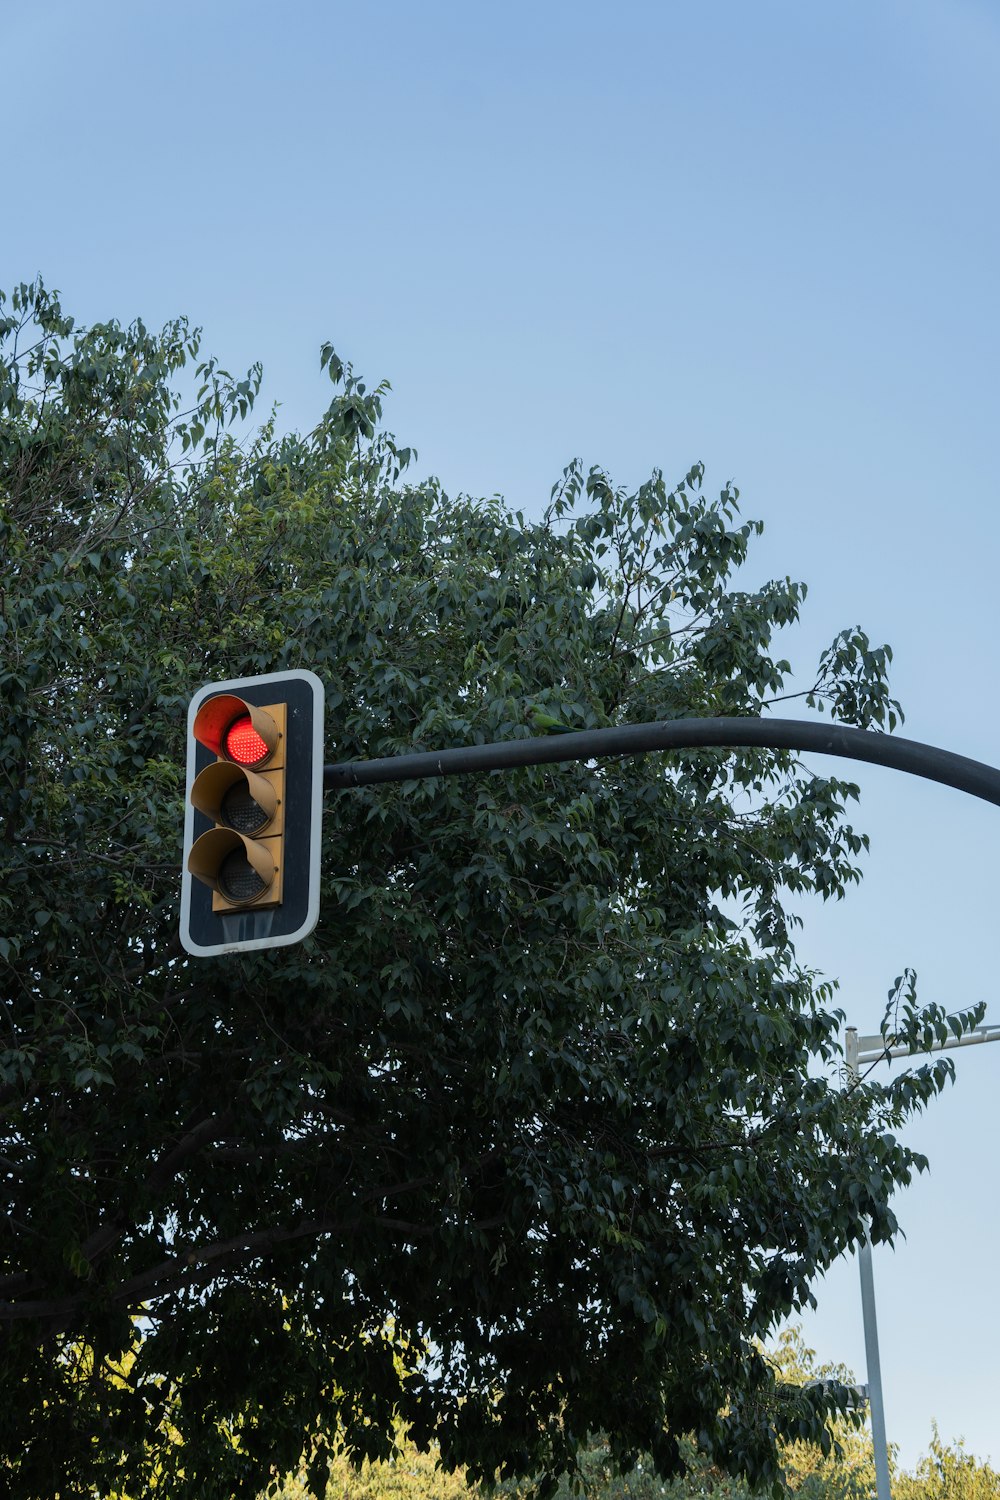 a stop light with a red light